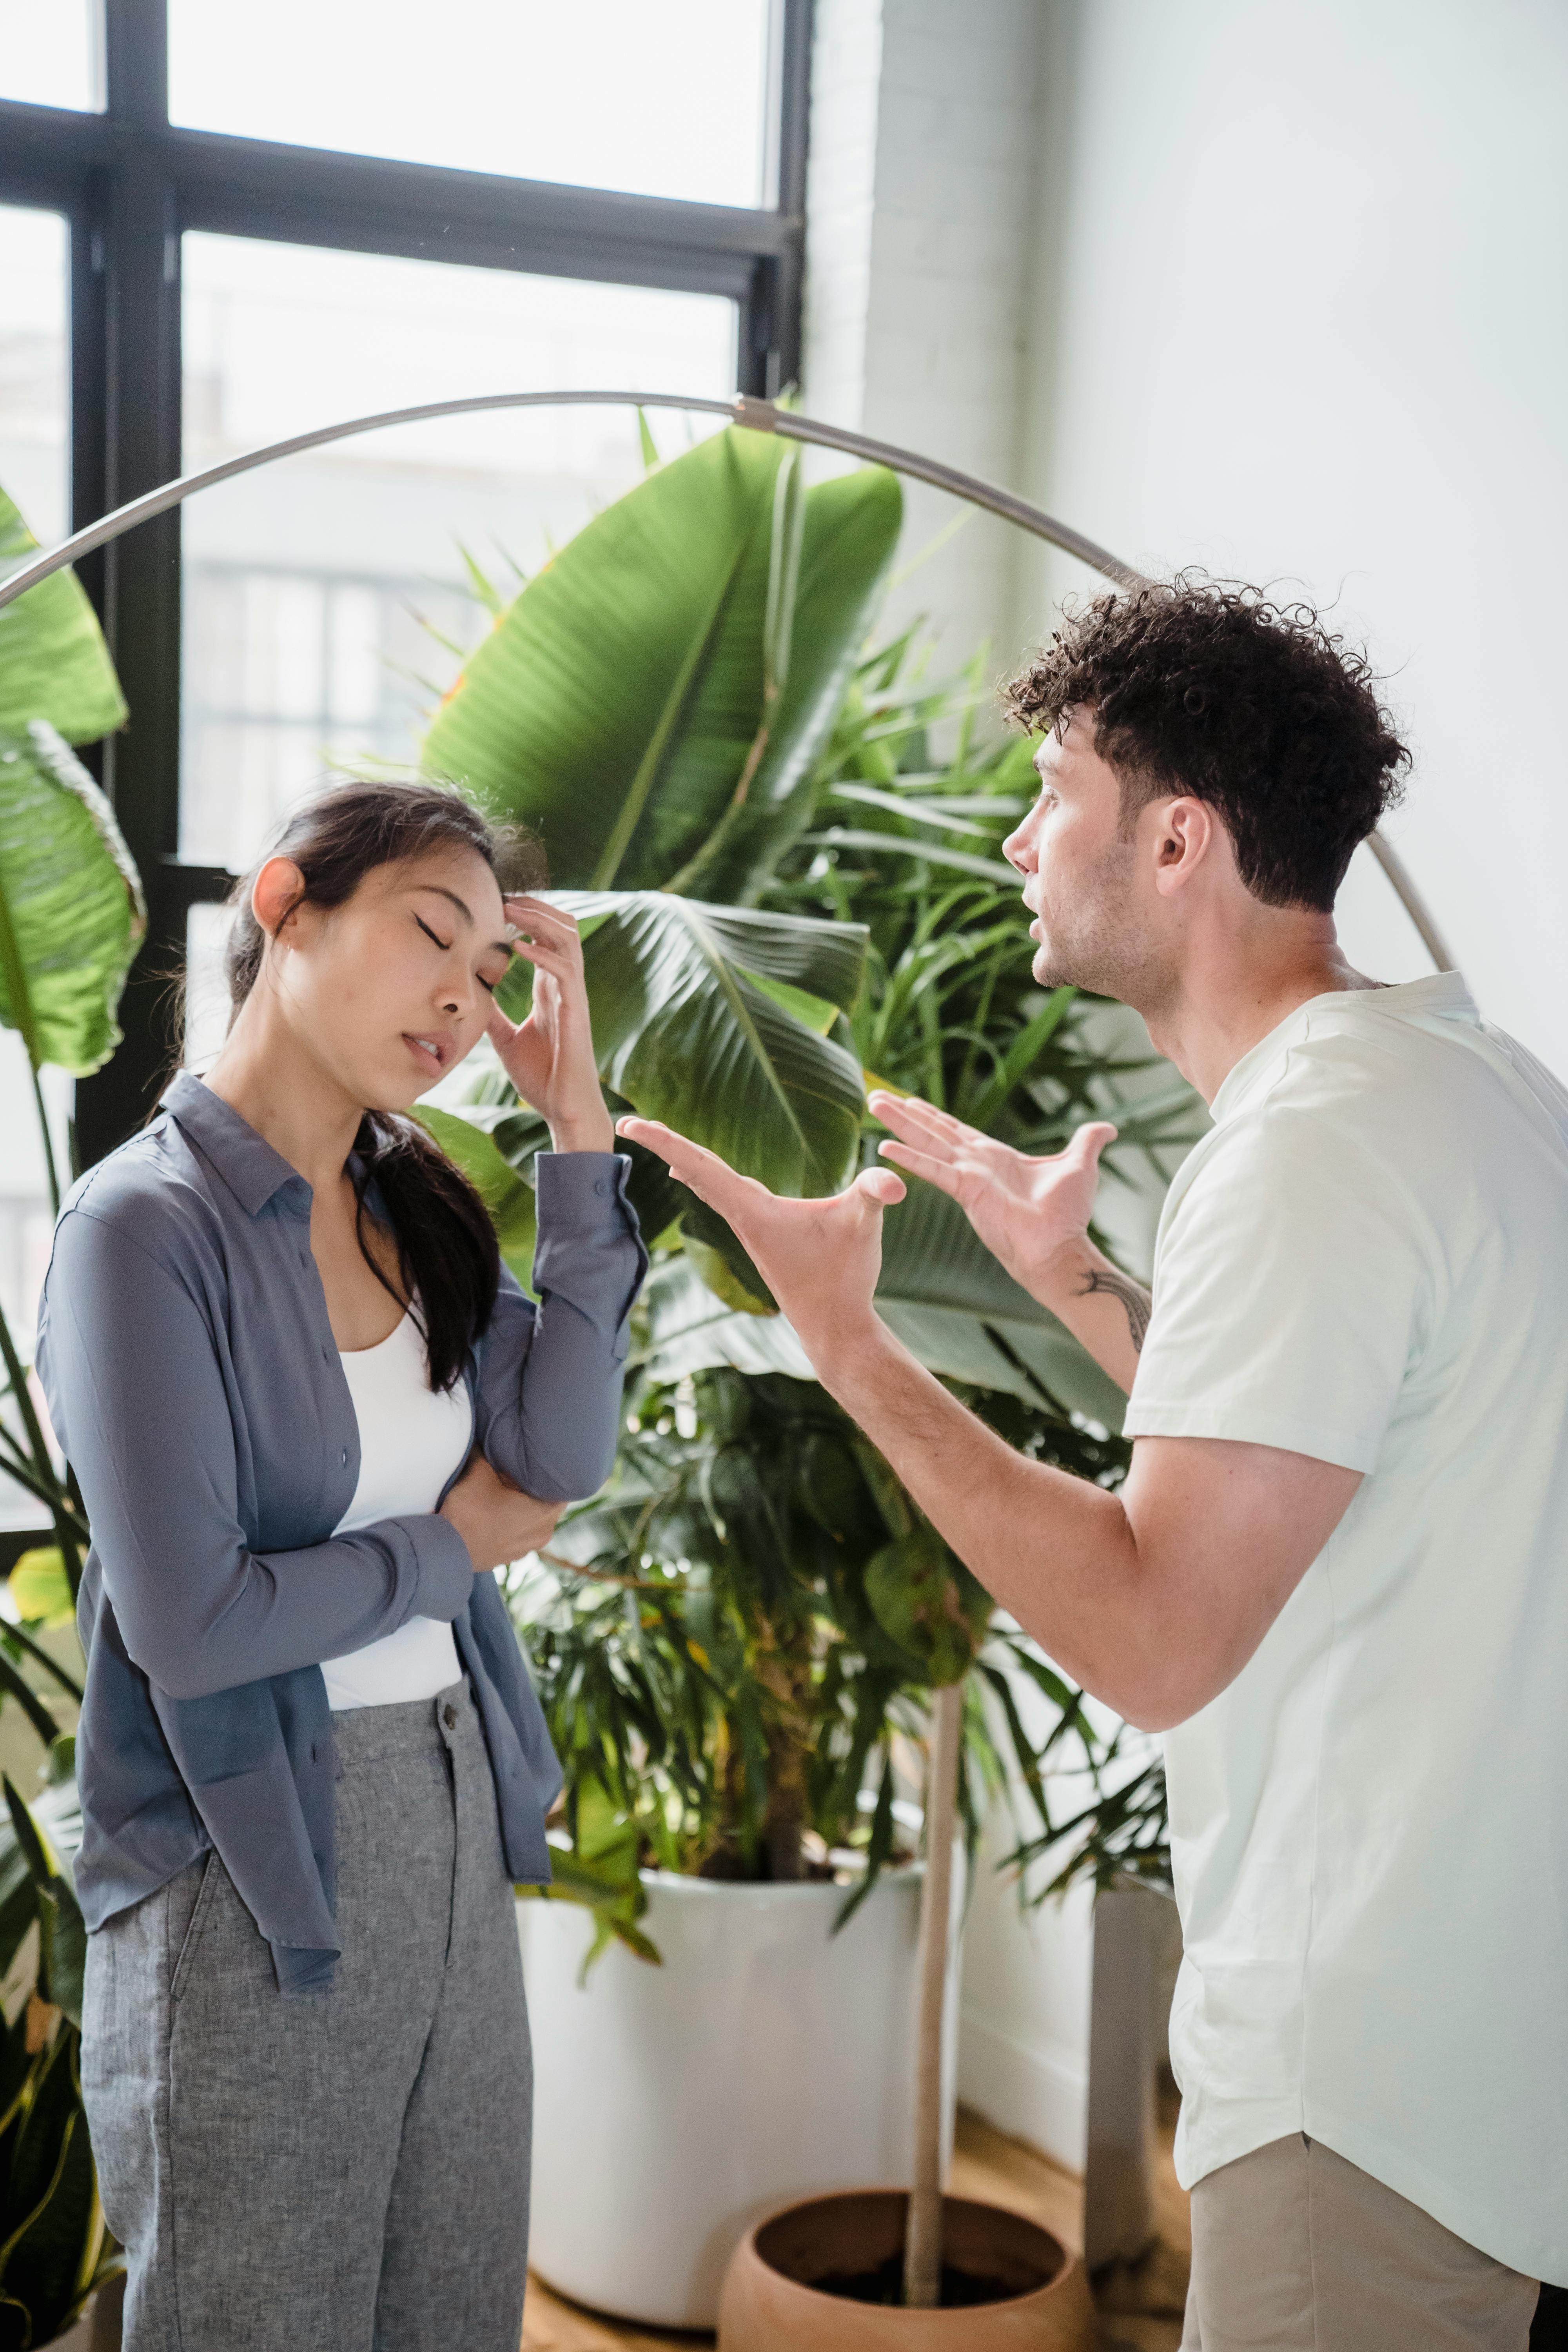 A man arguing with a woman | Source: Pexels